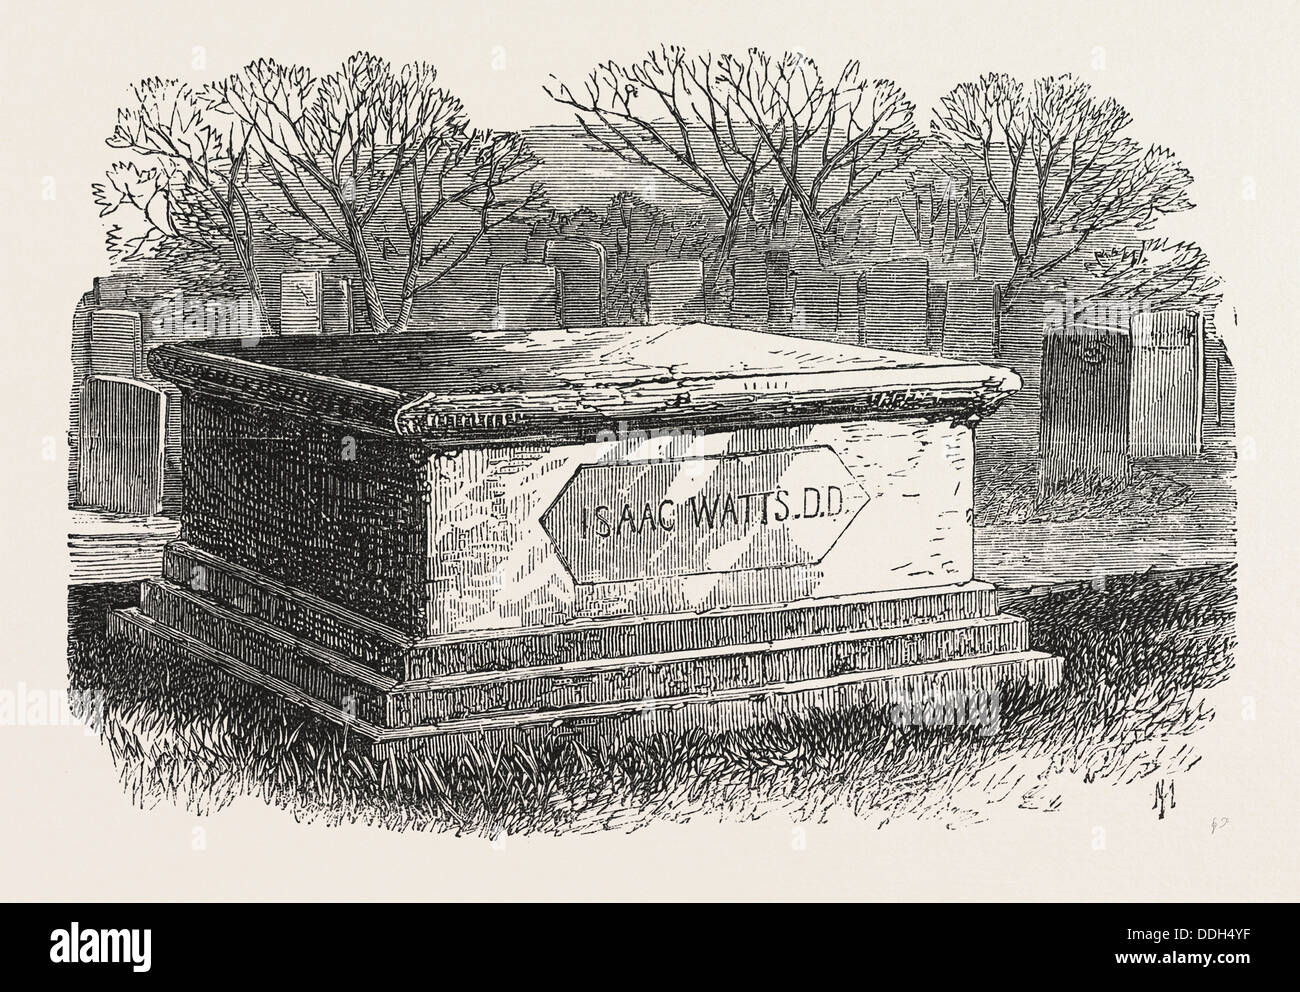 OLD TOMBS IN BUNHILL FIELDS CEMETERY: DR. ISAAC WATTS'S TOMB, 1869 Stock Photo